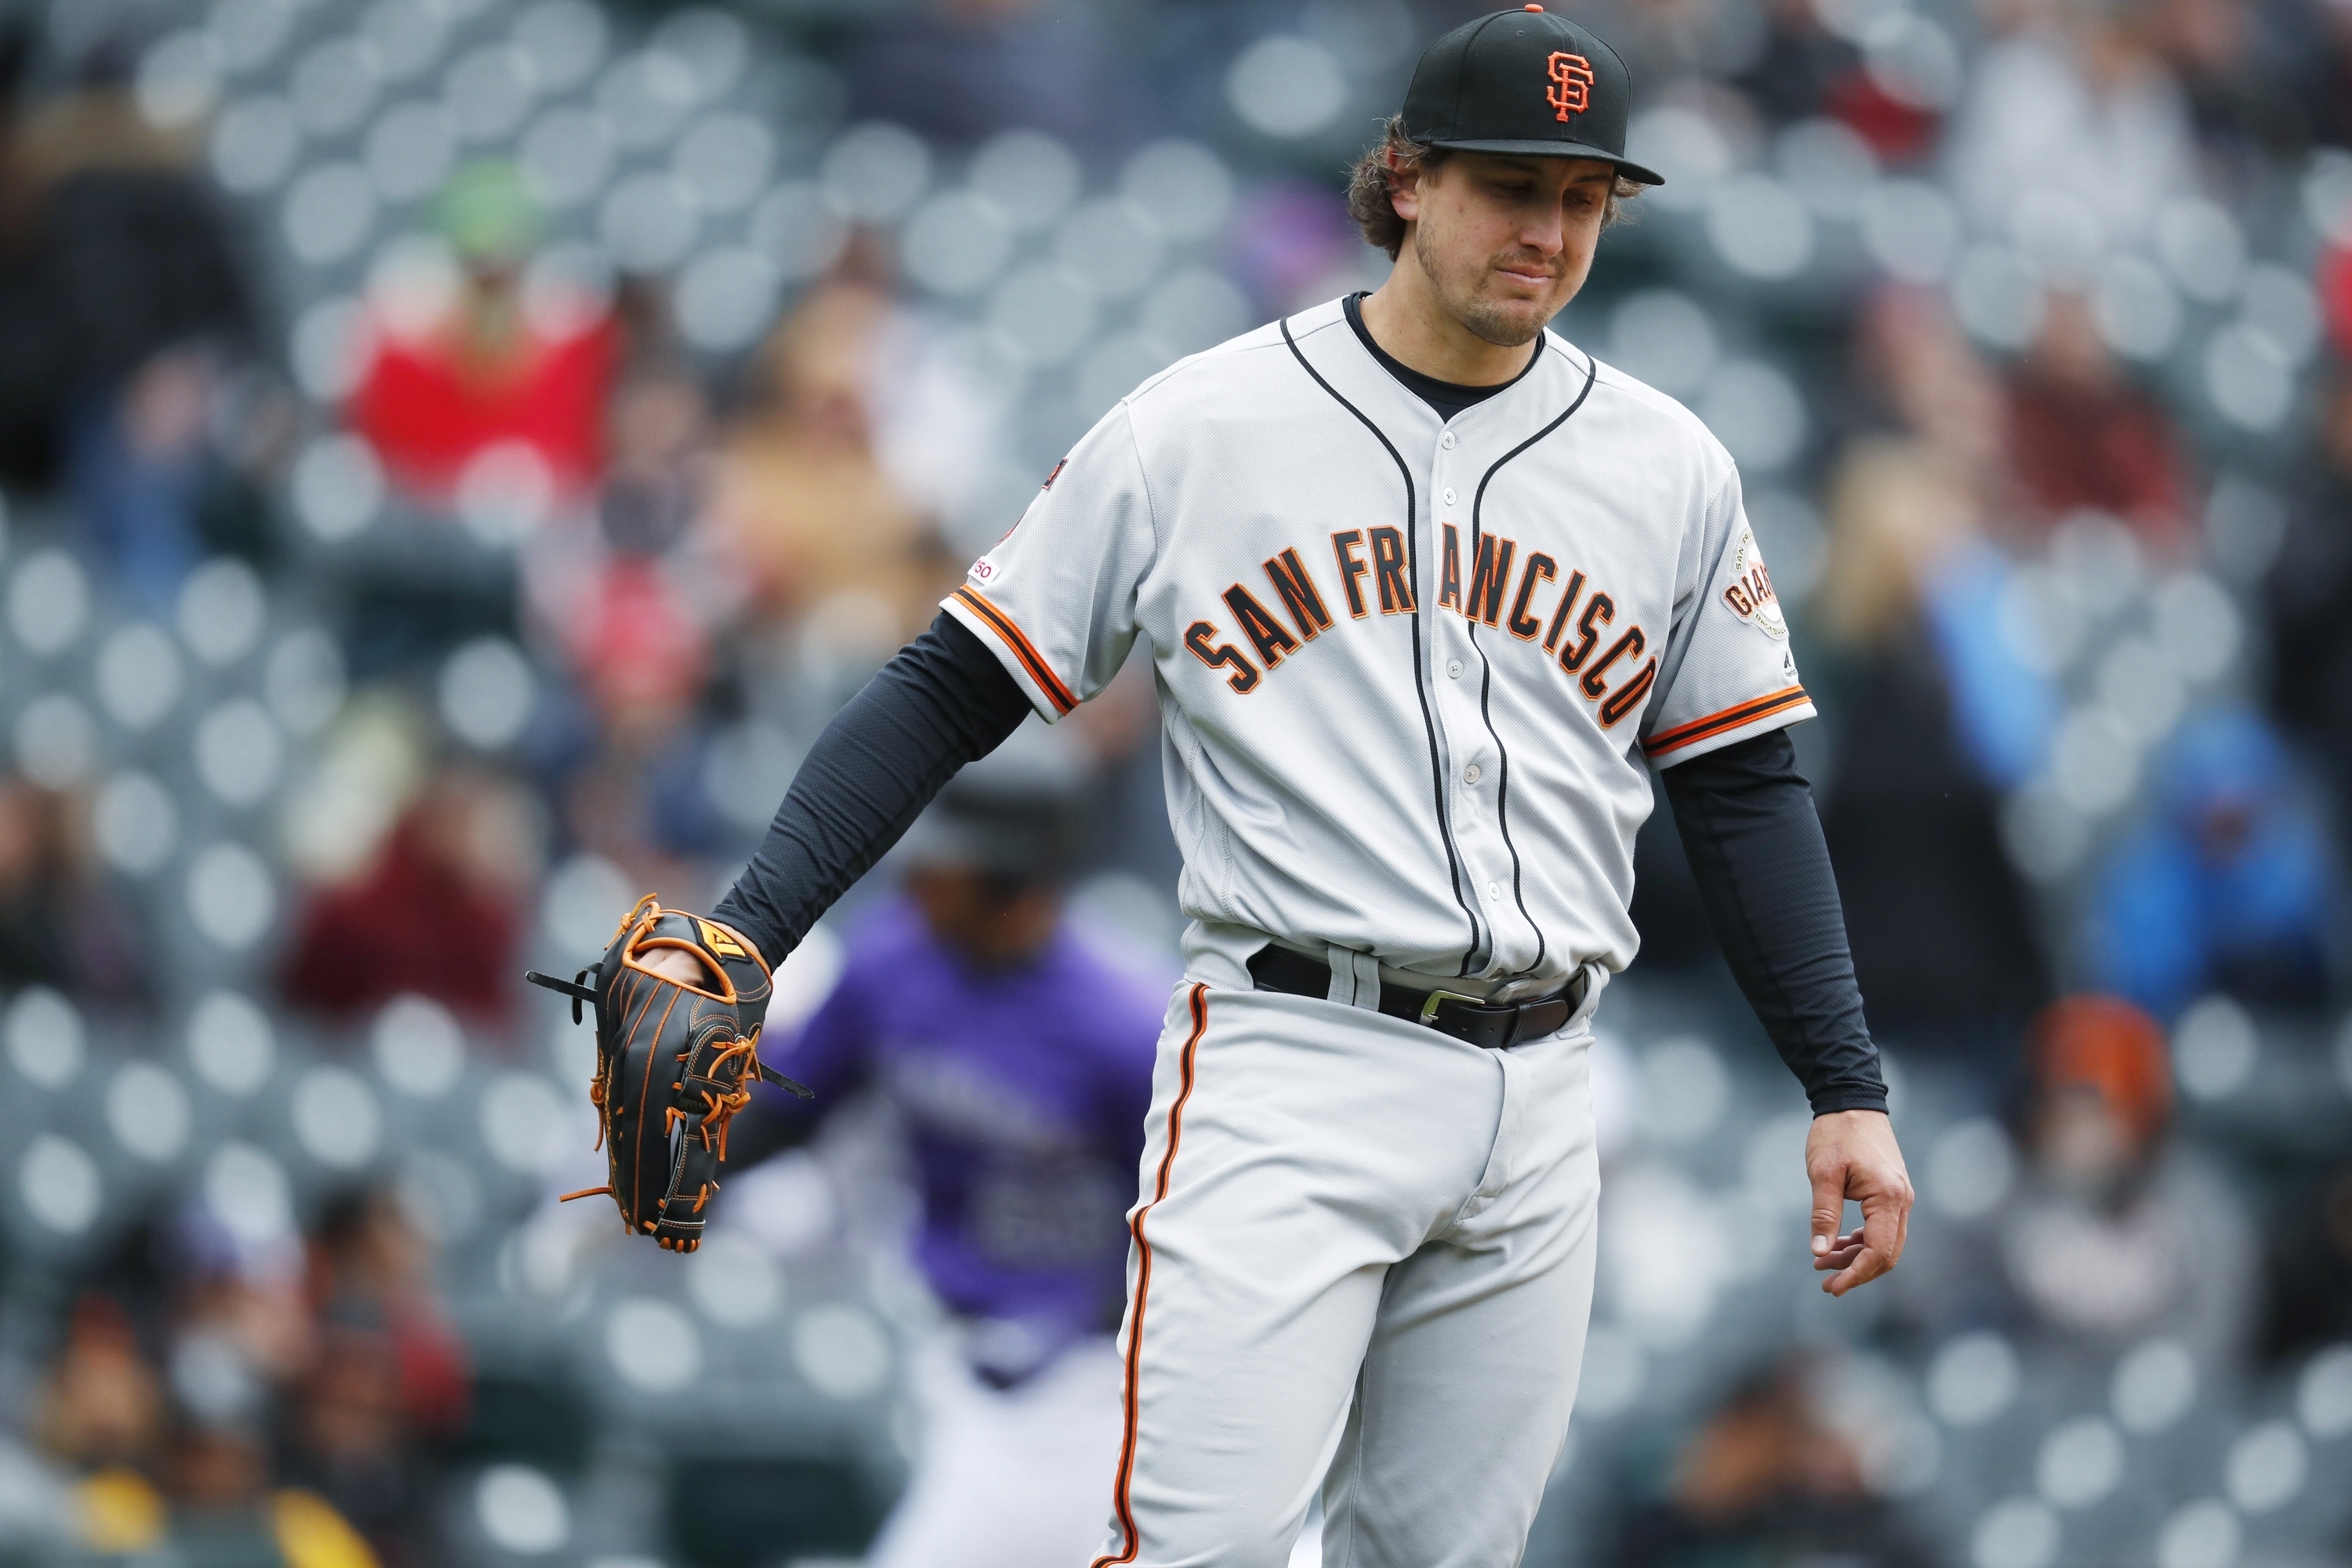 Giants president says lefty Holland’s injury wasn’t ‘fake’